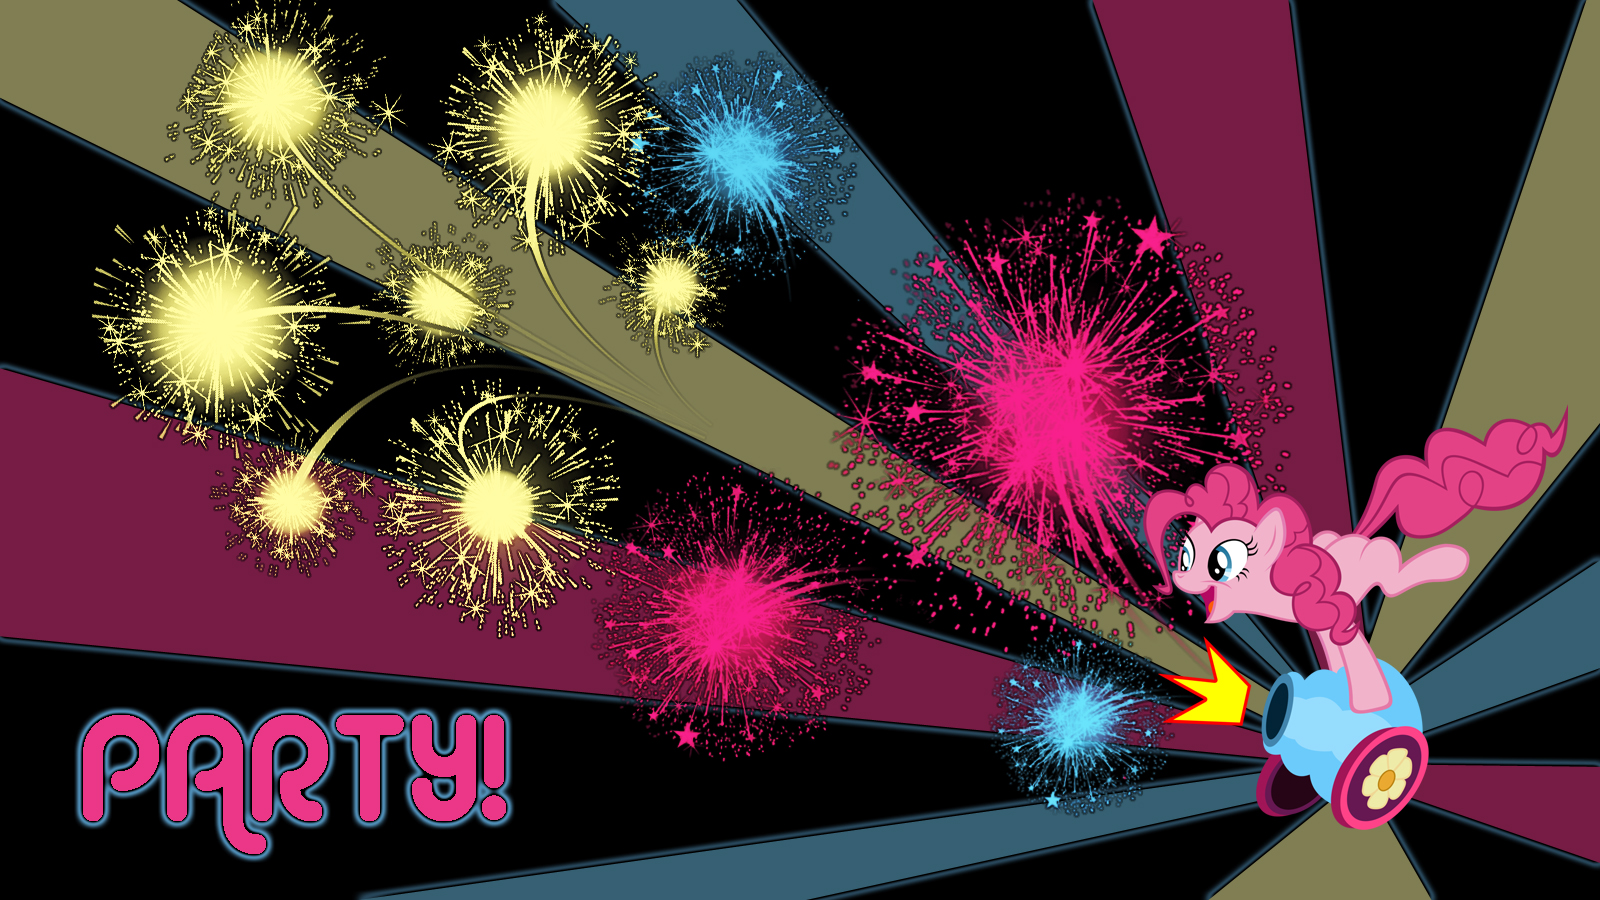 [Image: pinkie_pie_party_wallpaper_by_aloopyduck-d4rv0gf.jpg]